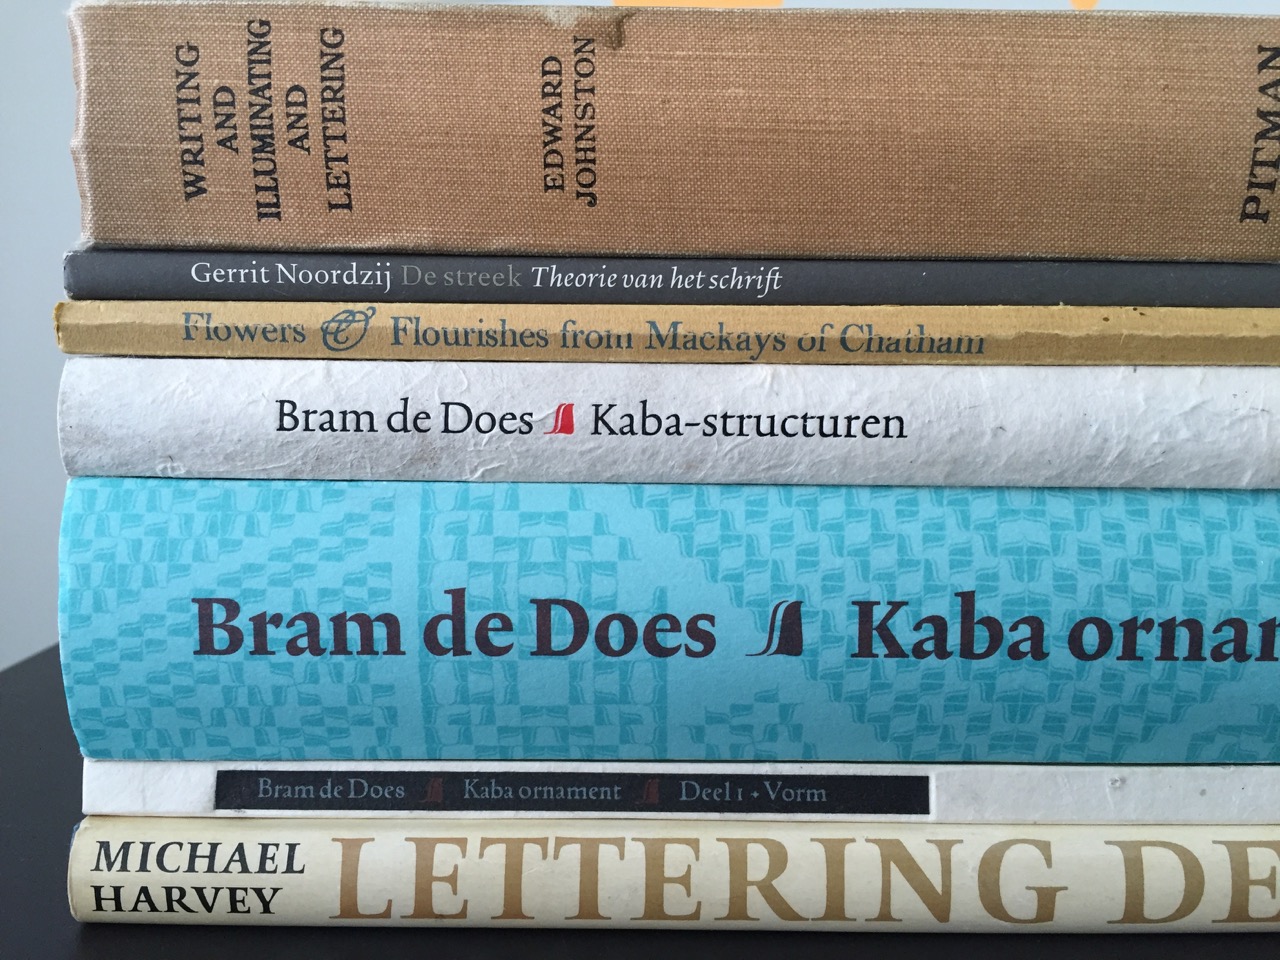 Books from The Hague studio.